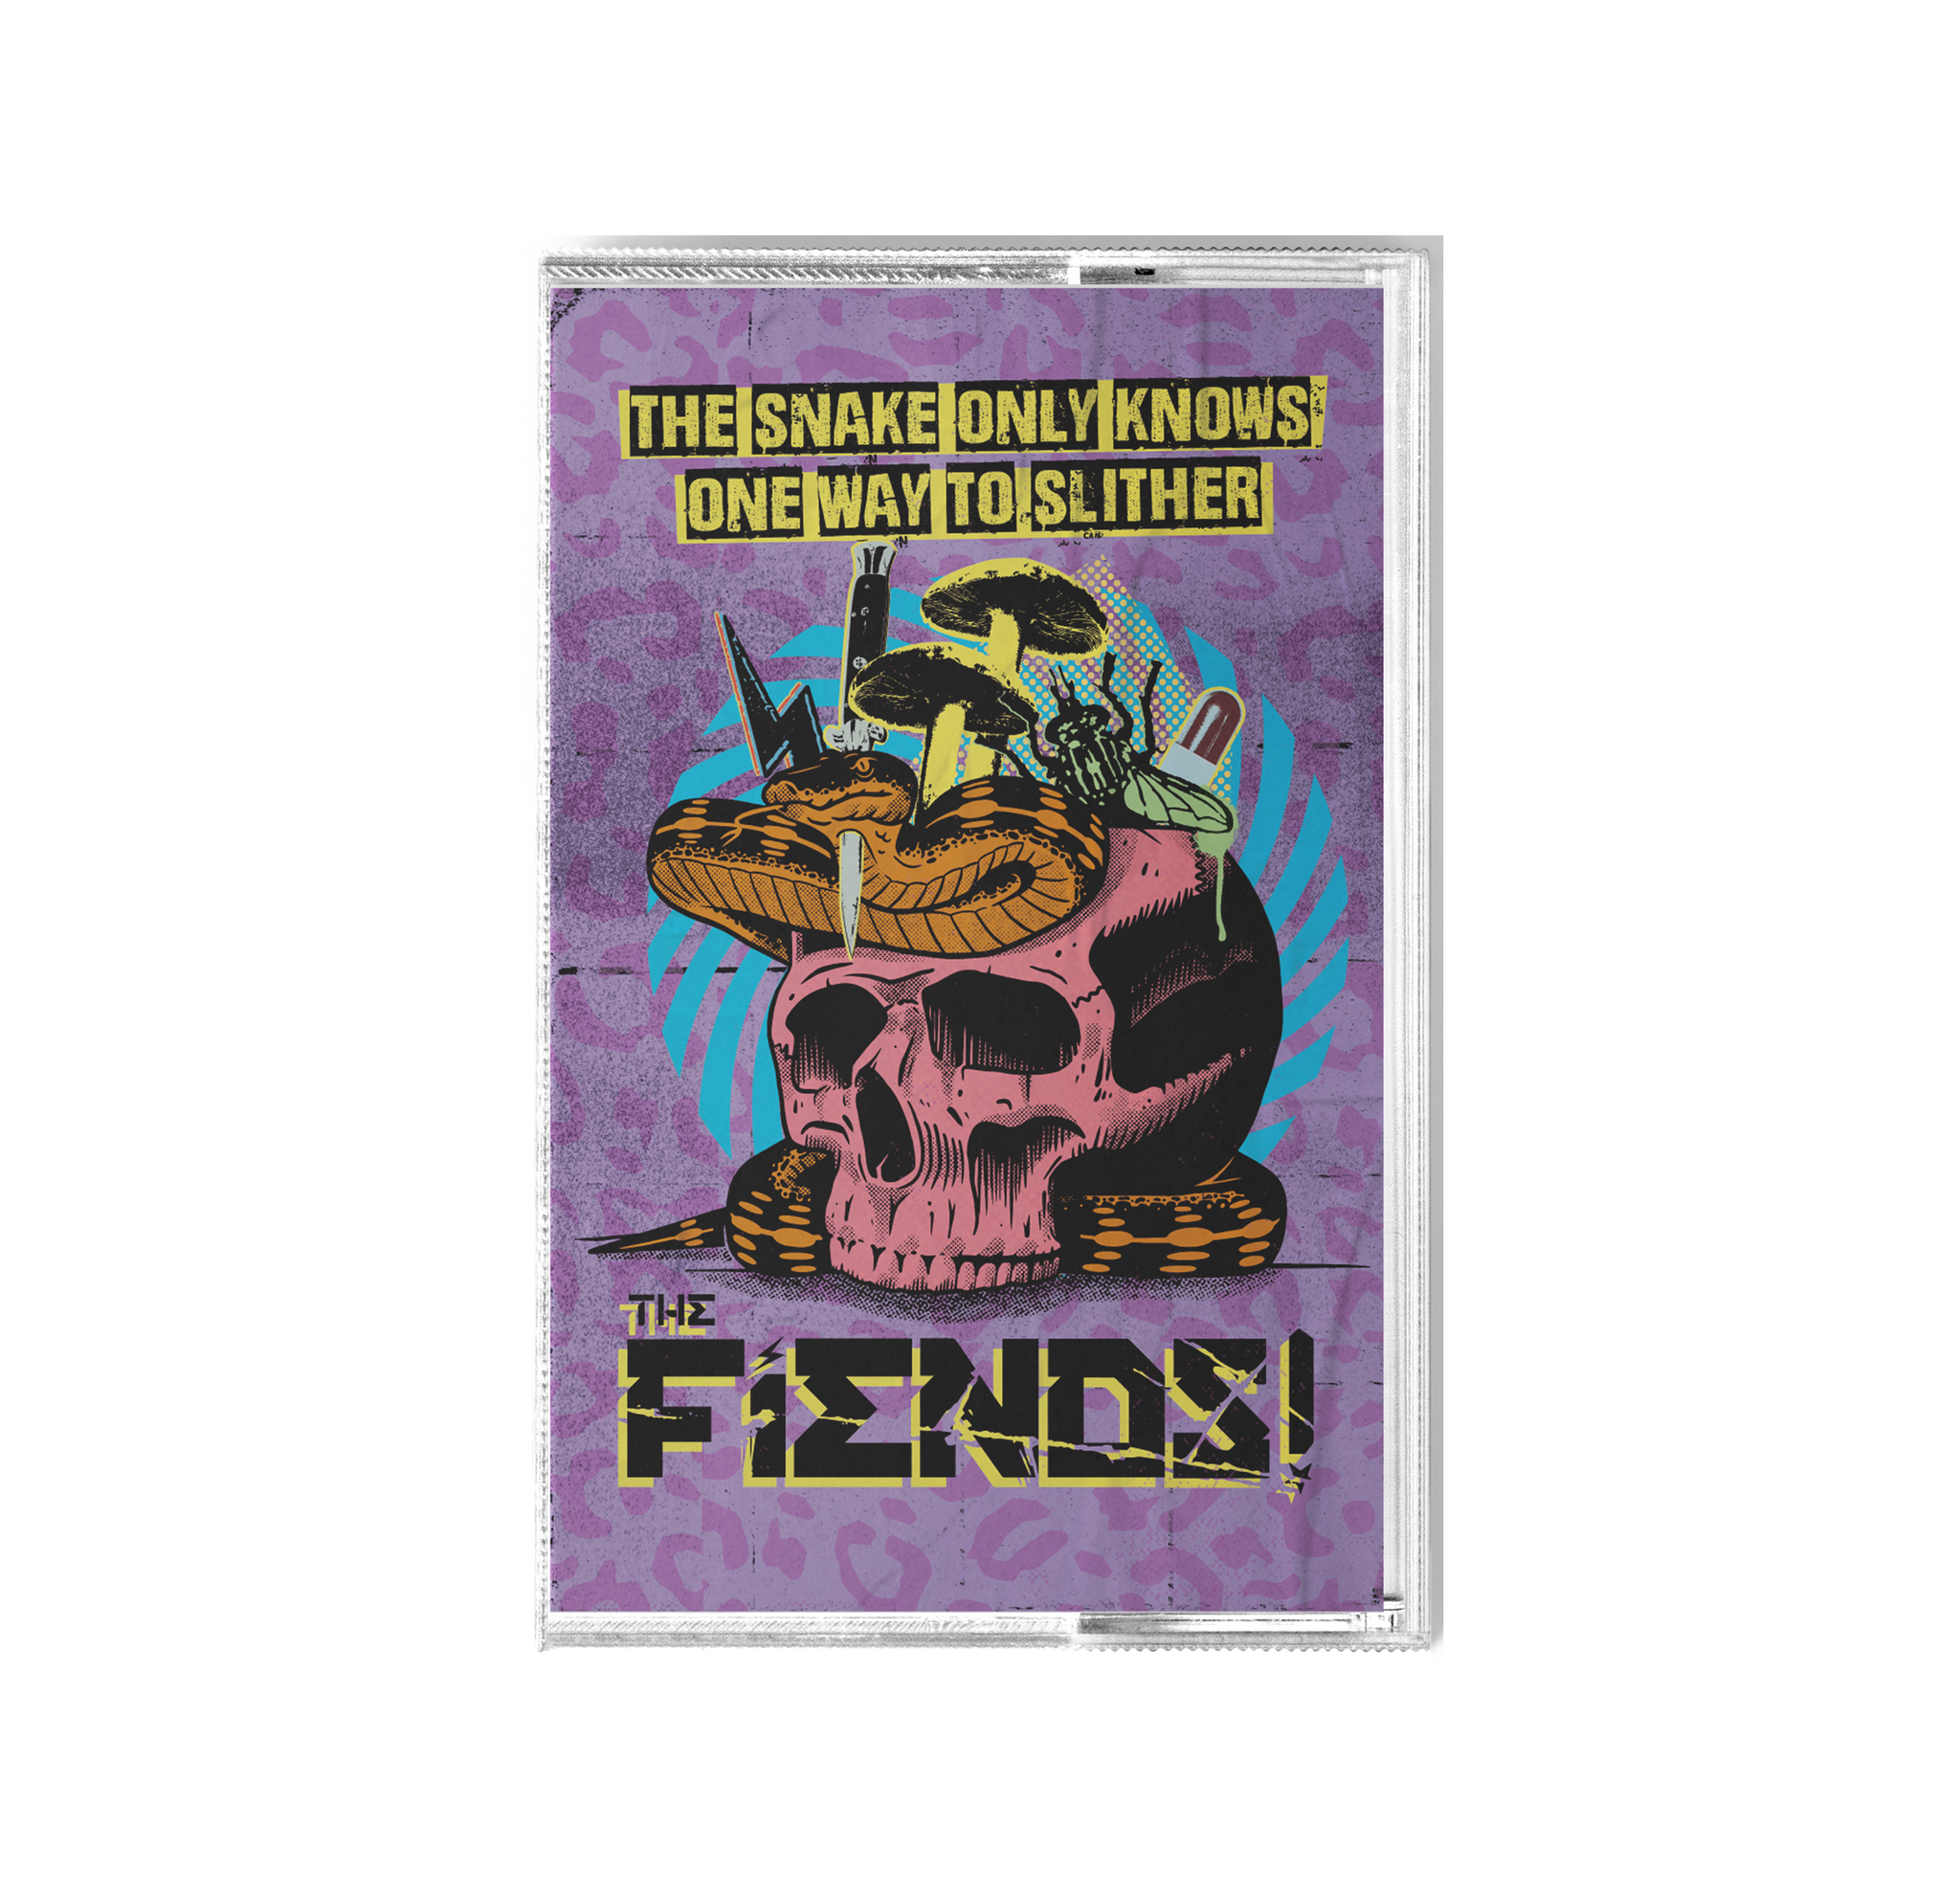 The Fiends! 'The Snake Only Knows One Way to Slither' Cassette